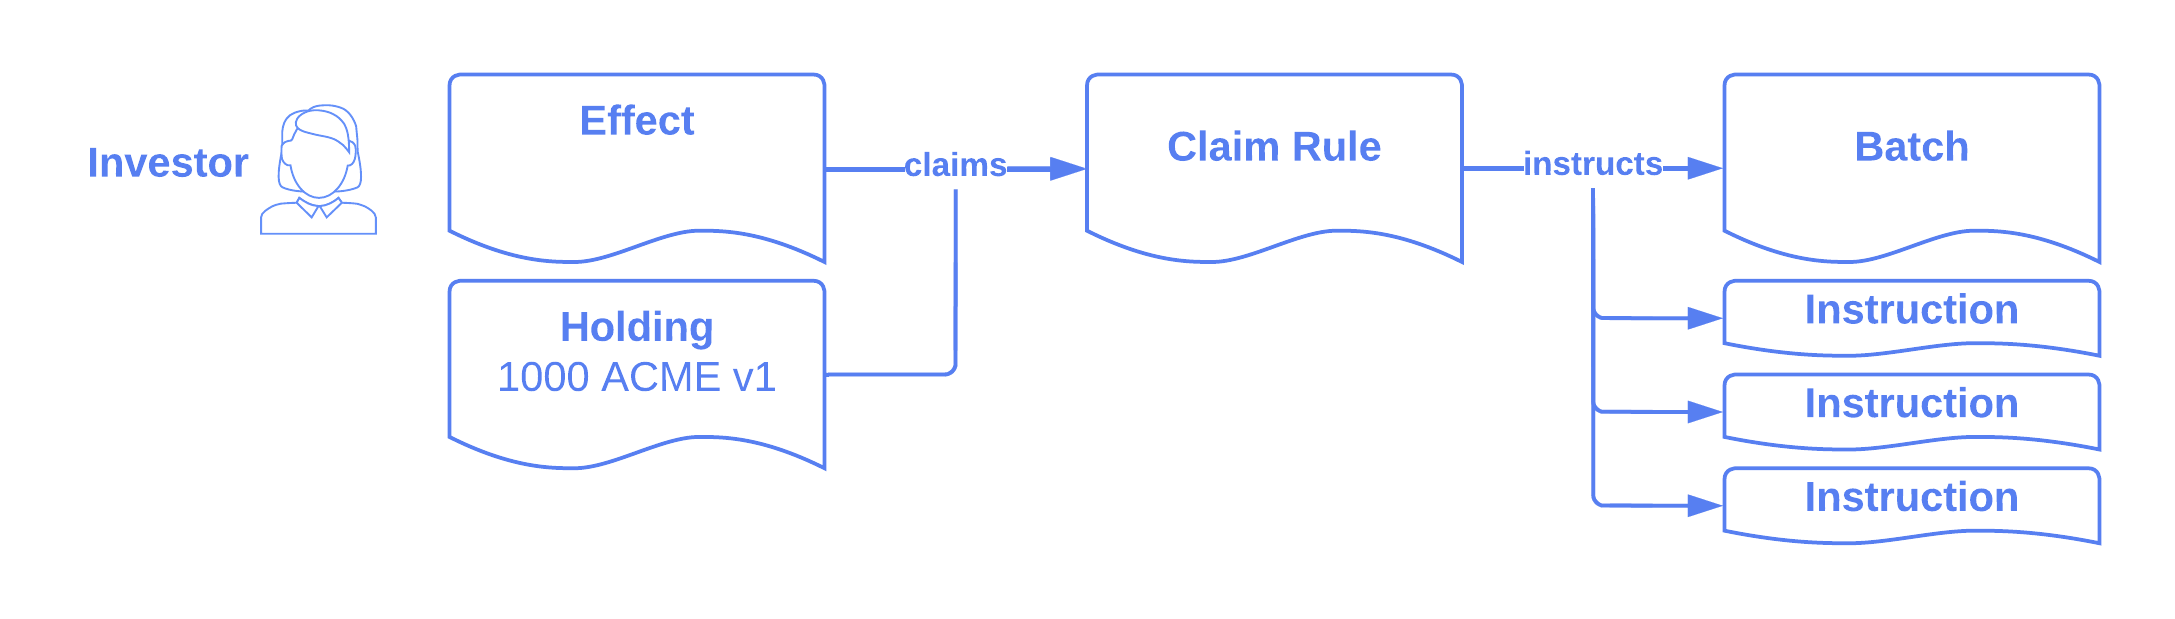 The investor claims the lifecycle effect through the claim rule, passing in their ACME v1 holding. This produces a batch and settlement instructions.